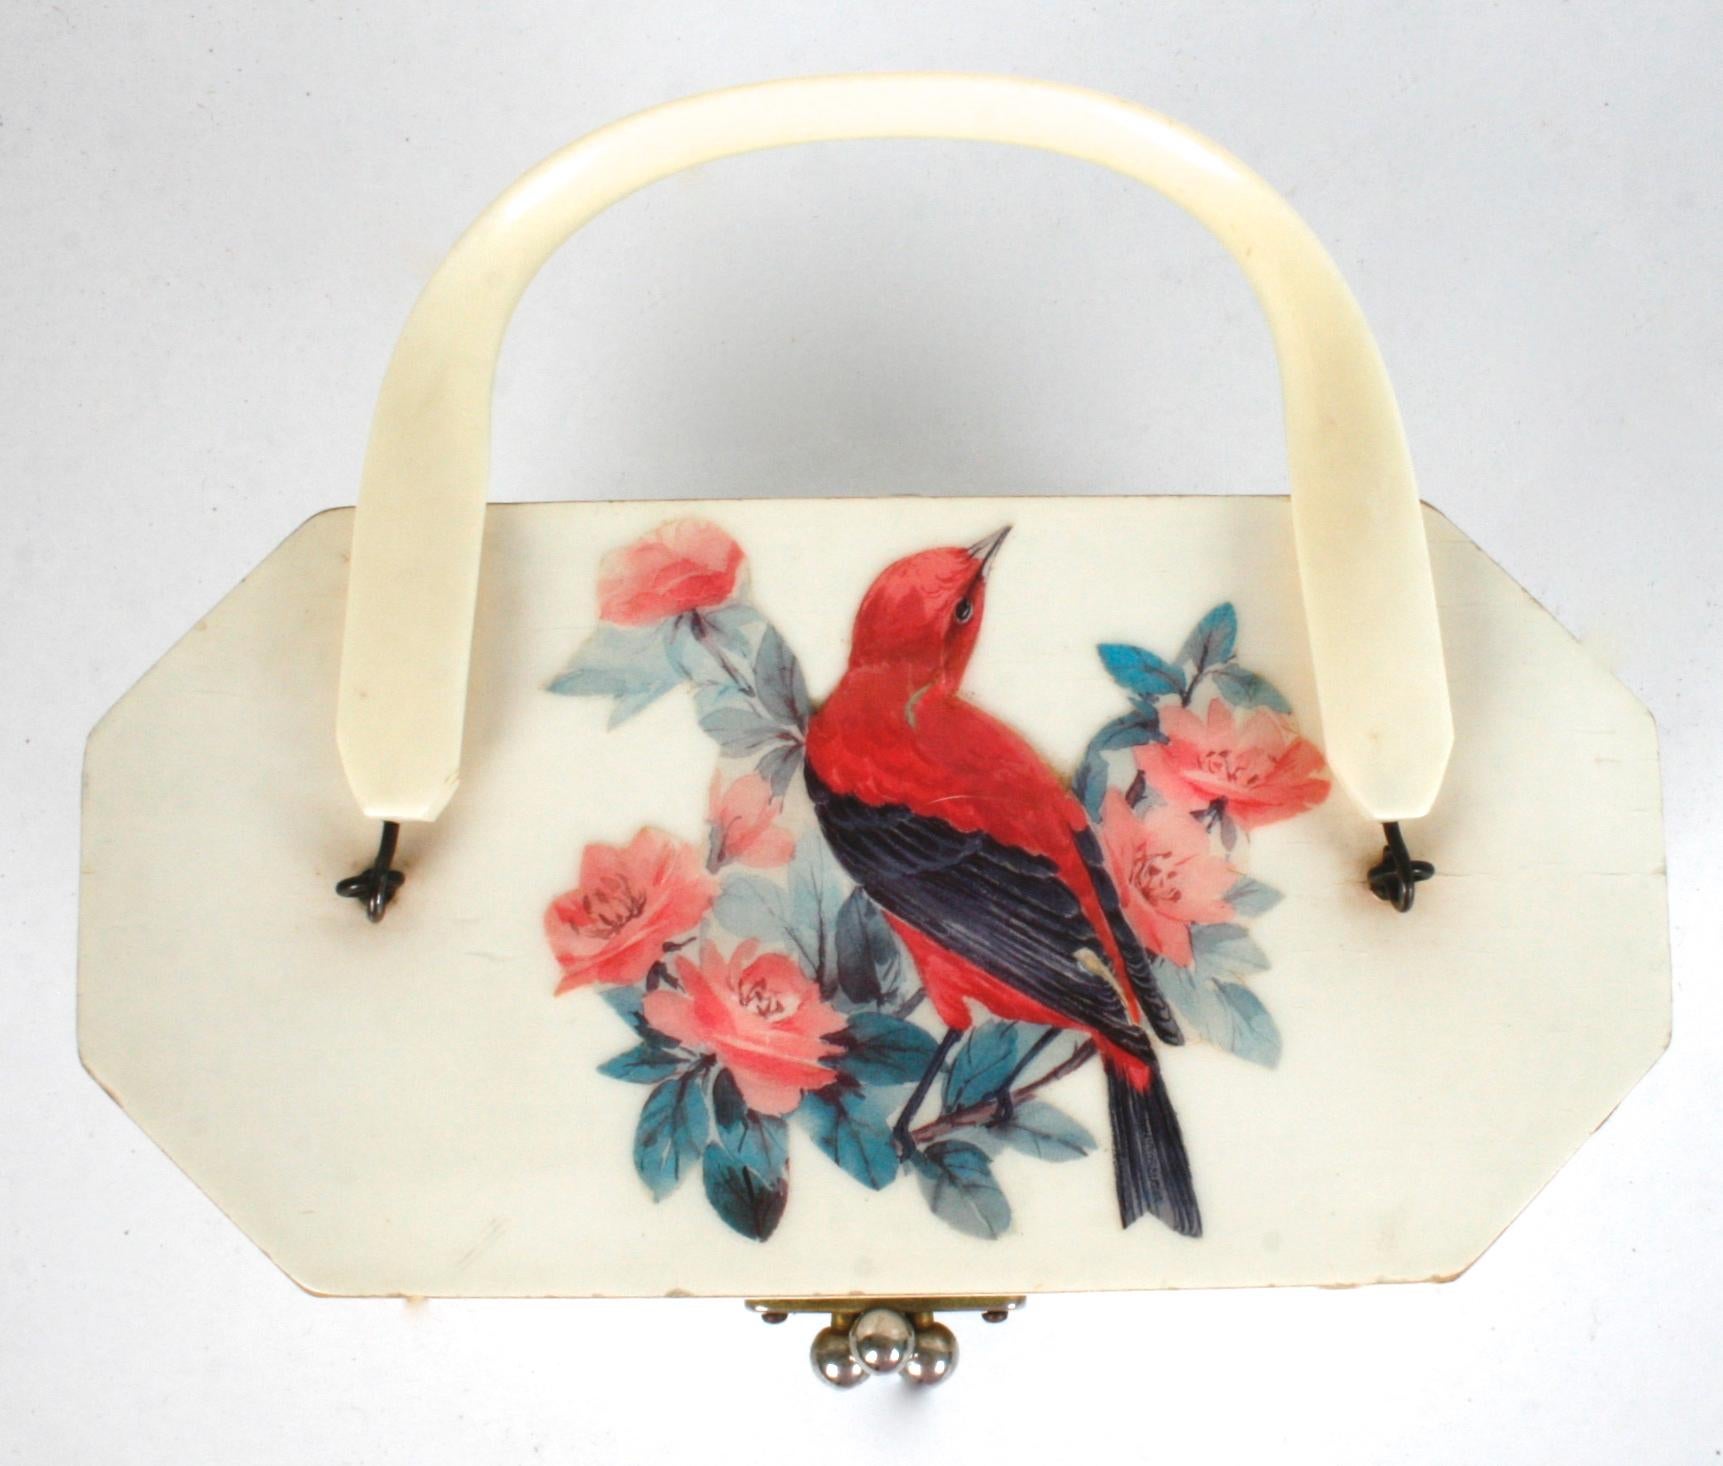 A raised decoupage box handbag by Annie Laurie of Palm Beach. On each side are raised decoupage birds and flowers. The top opens by a gold tone three ball closure and a bakelite handle. The interior is quilted in a grey blue cotton fabric and